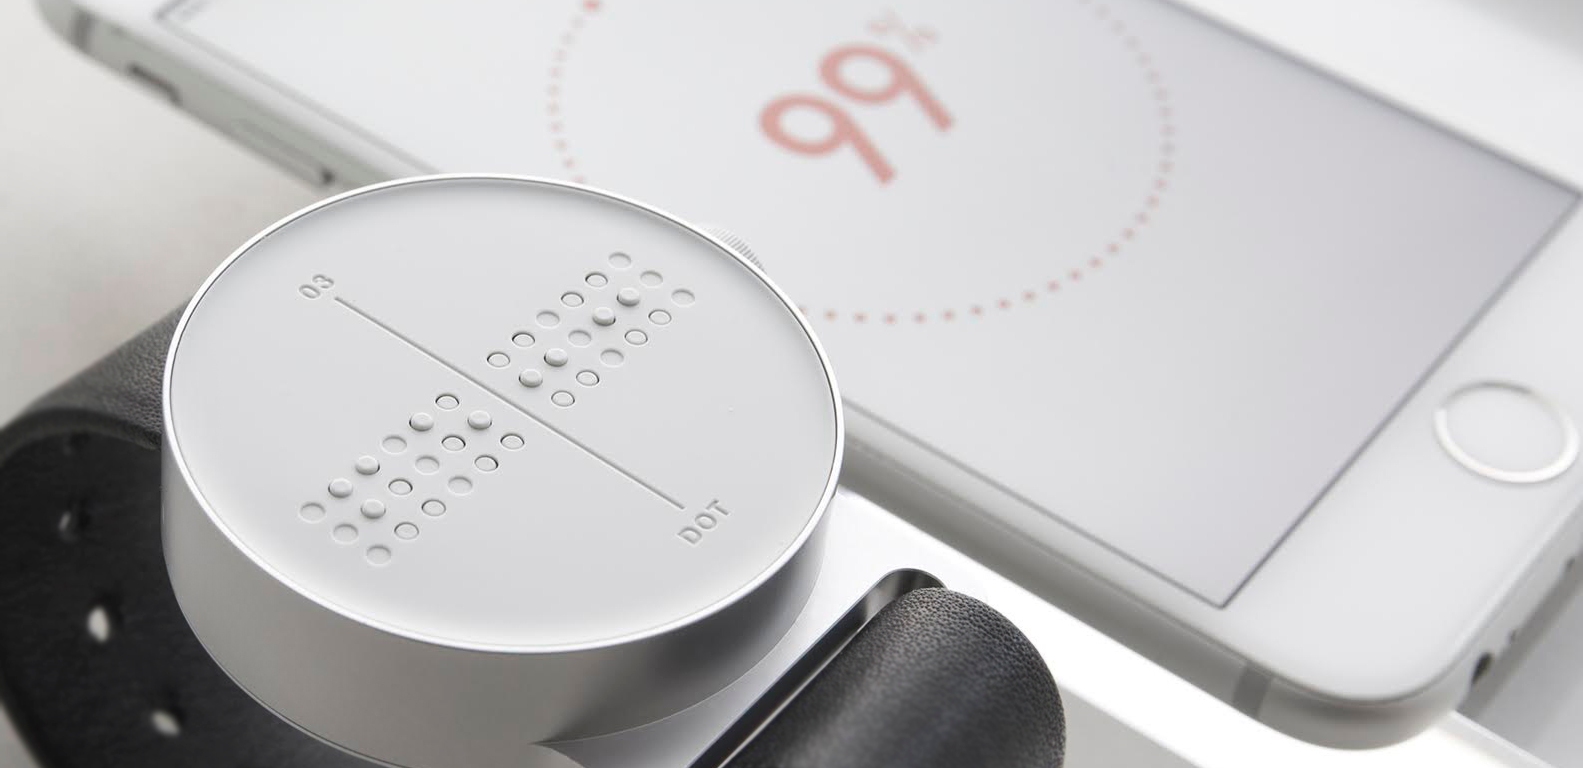 Dot Watch displaying loading info from a phone screen in Braille